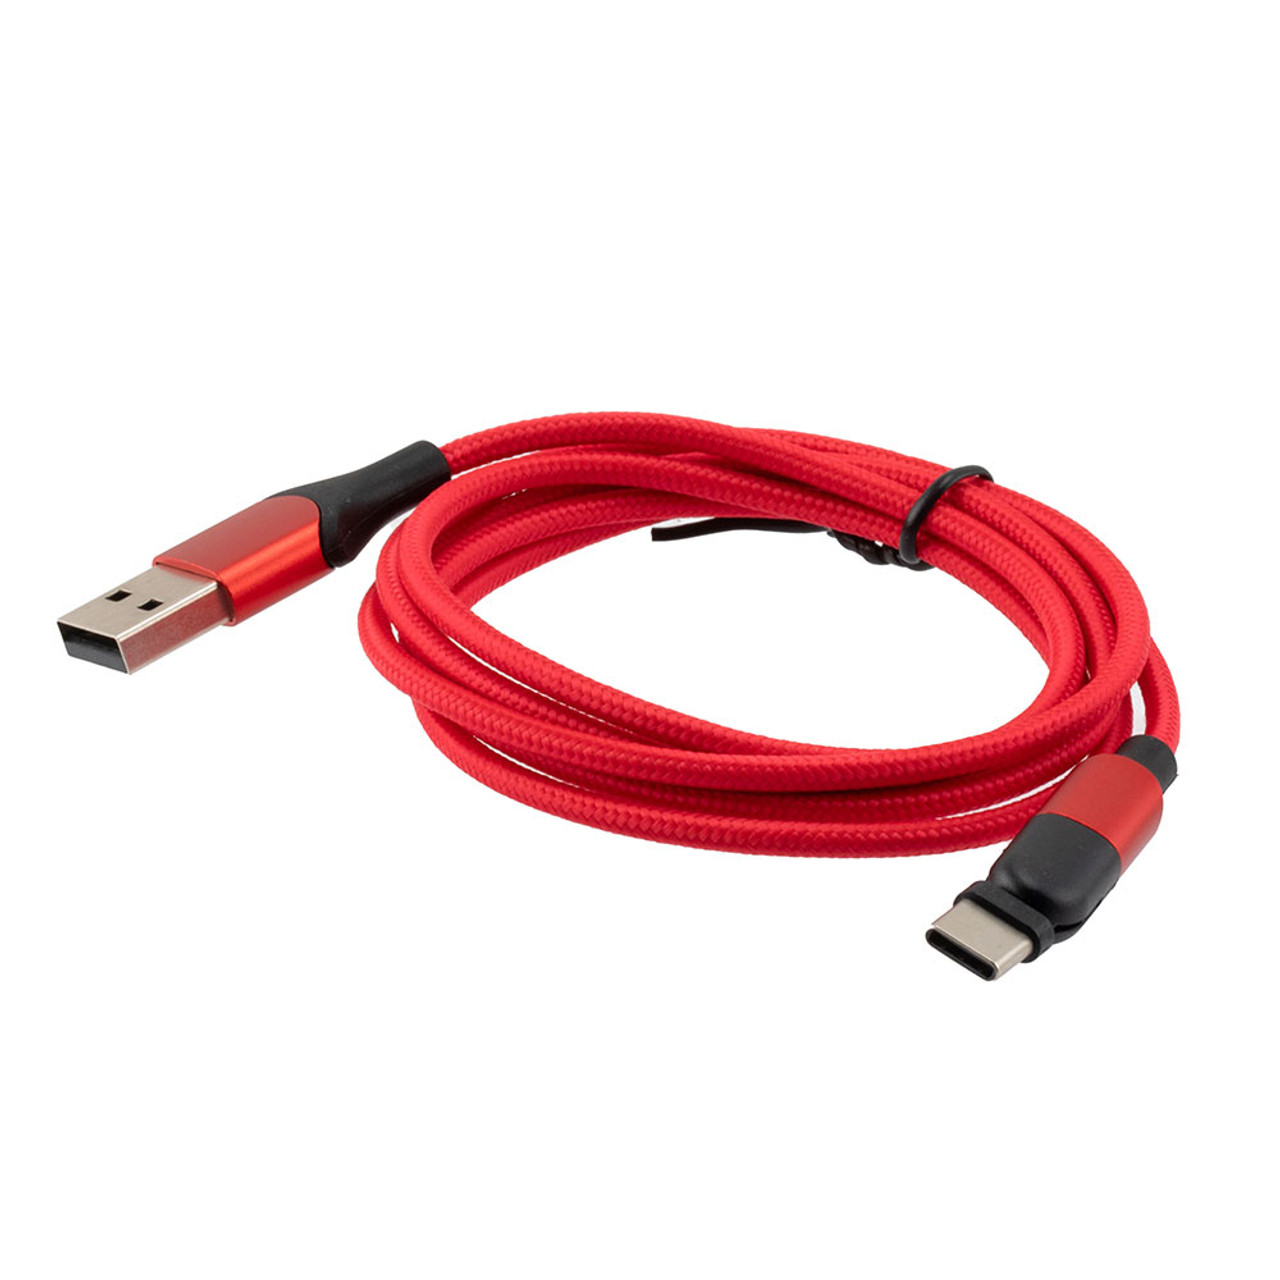 NavePoint USB 2.0 180-degree Rotating Head PVC Nylon Braided Cable, Red, USB A Male to USB C Micro Male, 1 Meter 